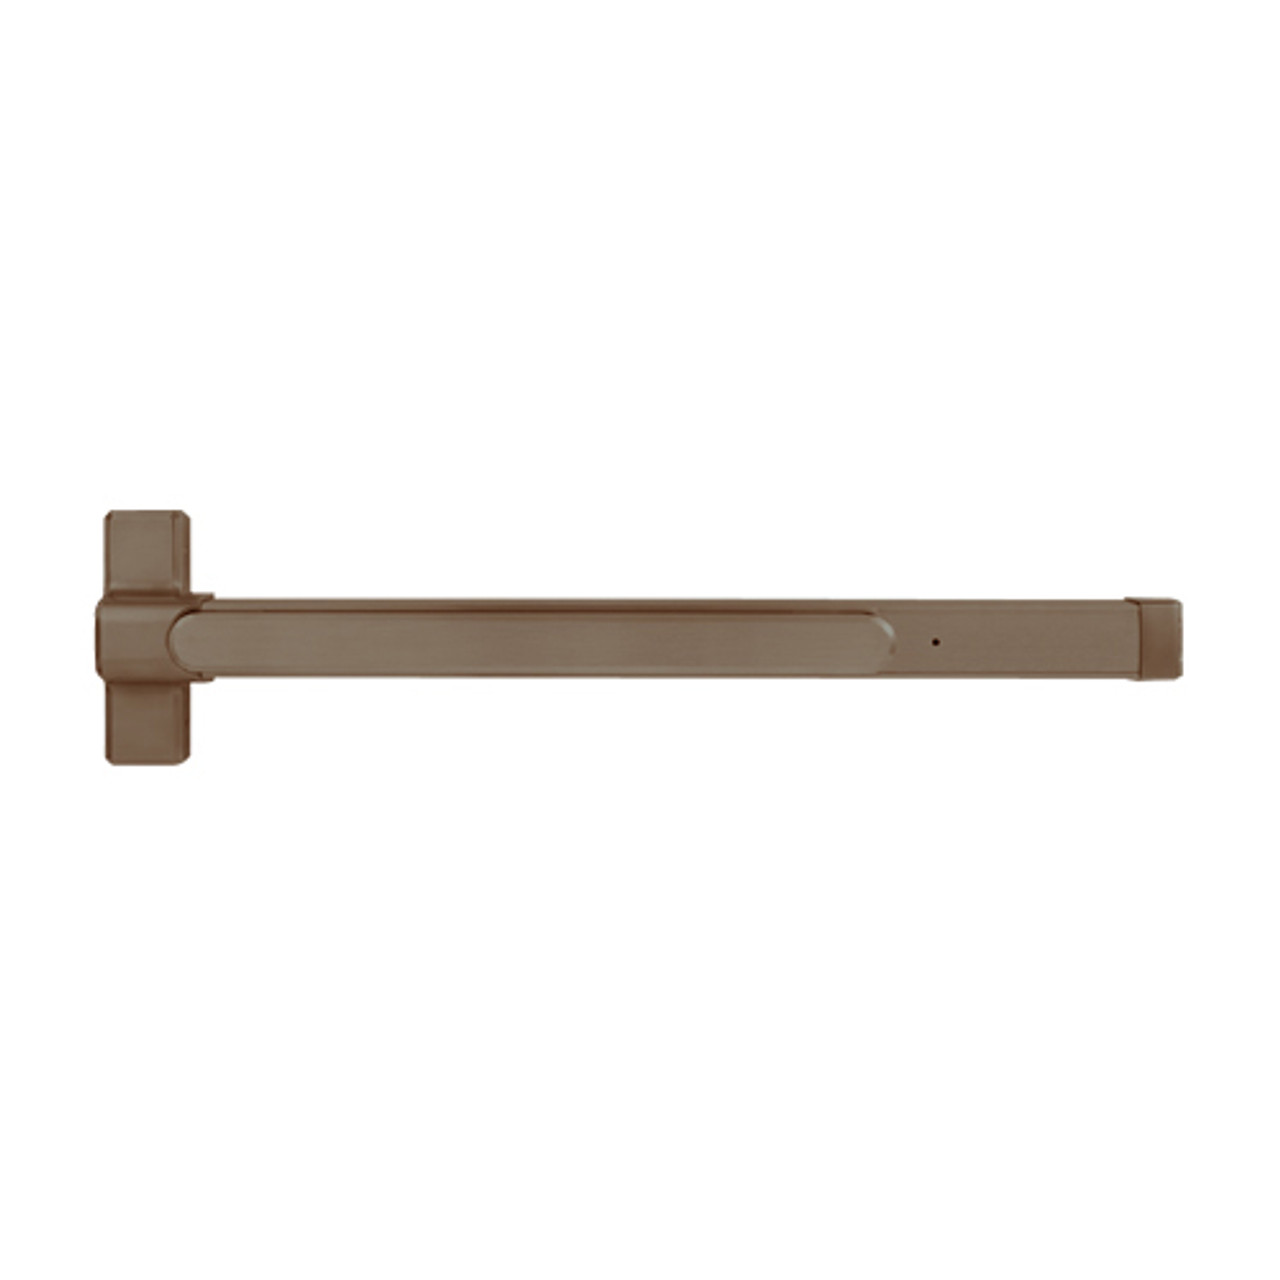 QED119LR-48-7-313AN Stanley QED100 Series Heavy Duty Surface Vertical Rod Fire Rated Exit Device in Anodized Duranodic Bronze Finish